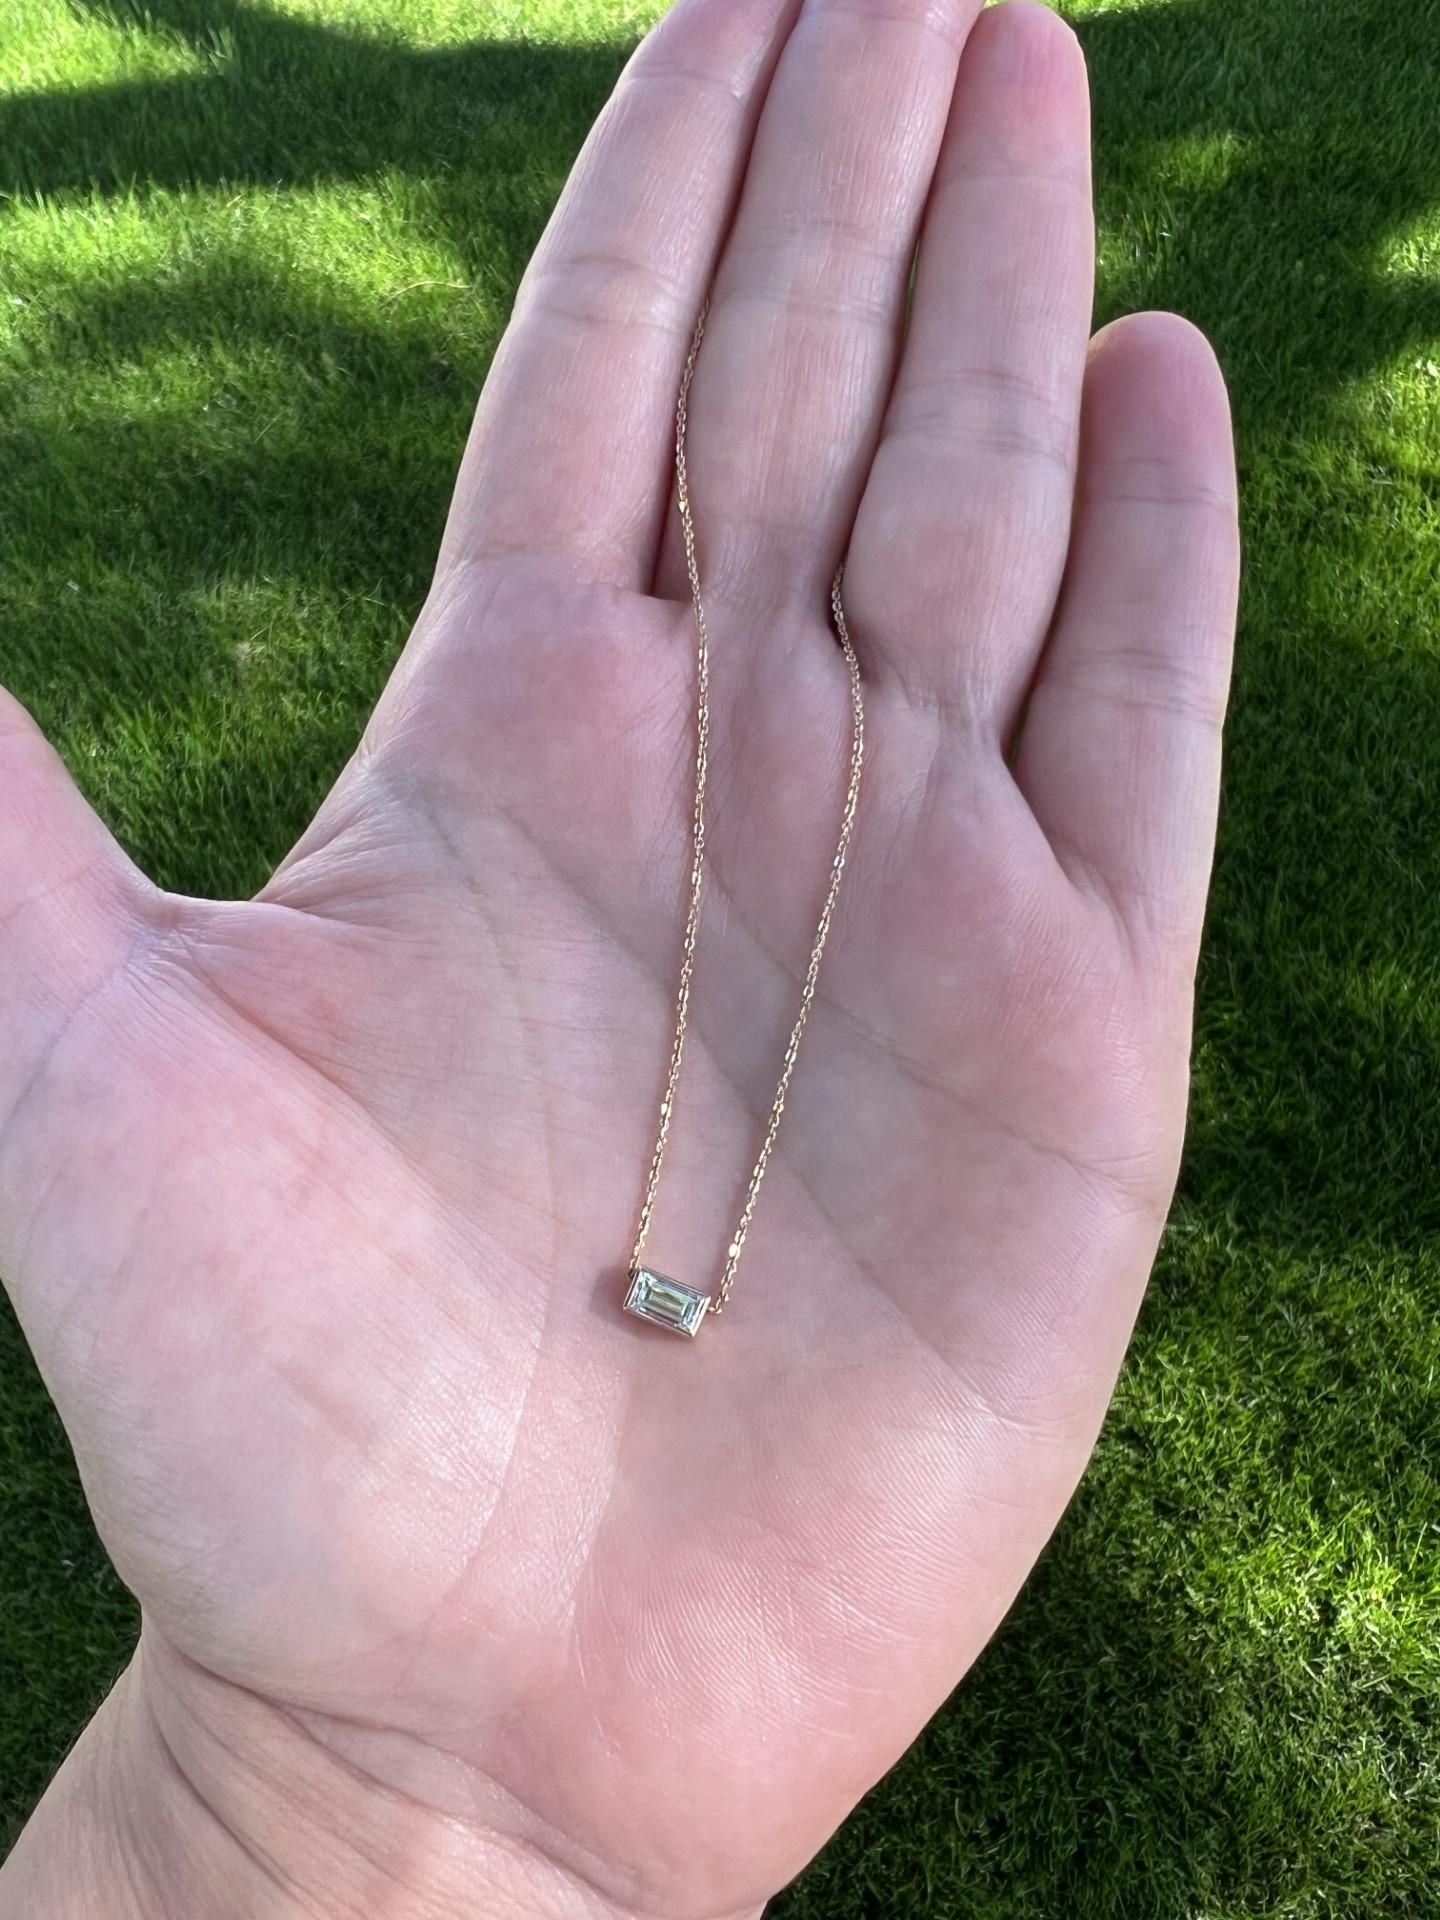 Petite Diamond Baguette Pendant Necklace in Rose Gold In New Condition For Sale In Phoenix, AZ